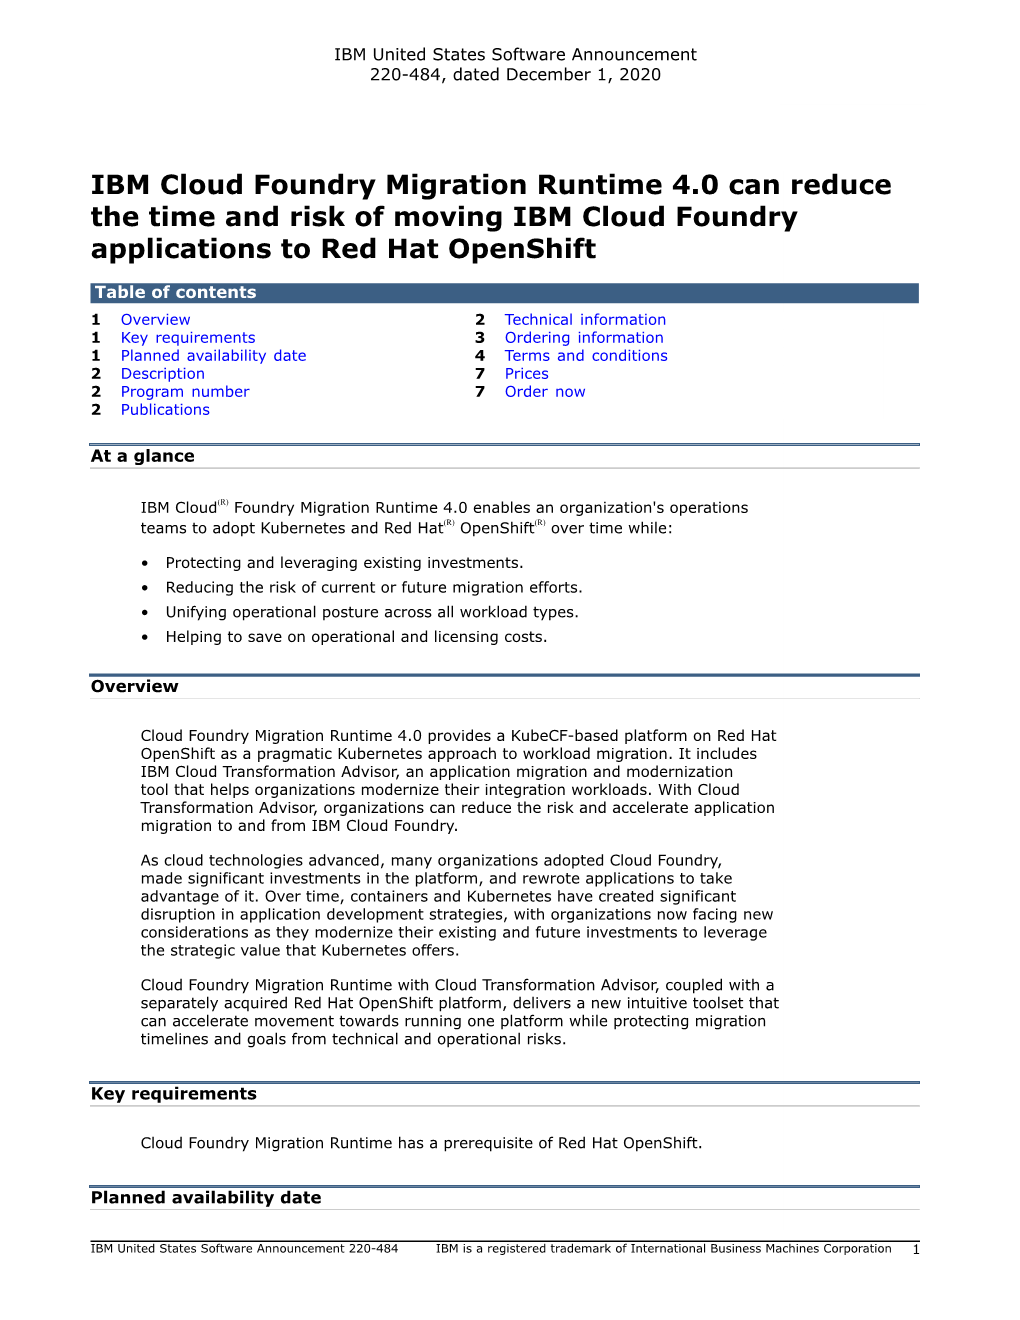 IBM Cloud Foundry Migration Runtime 4.0 Can Reduce the Time and Risk of Moving IBM Cloud Foundry Applications to Red Hat Openshift